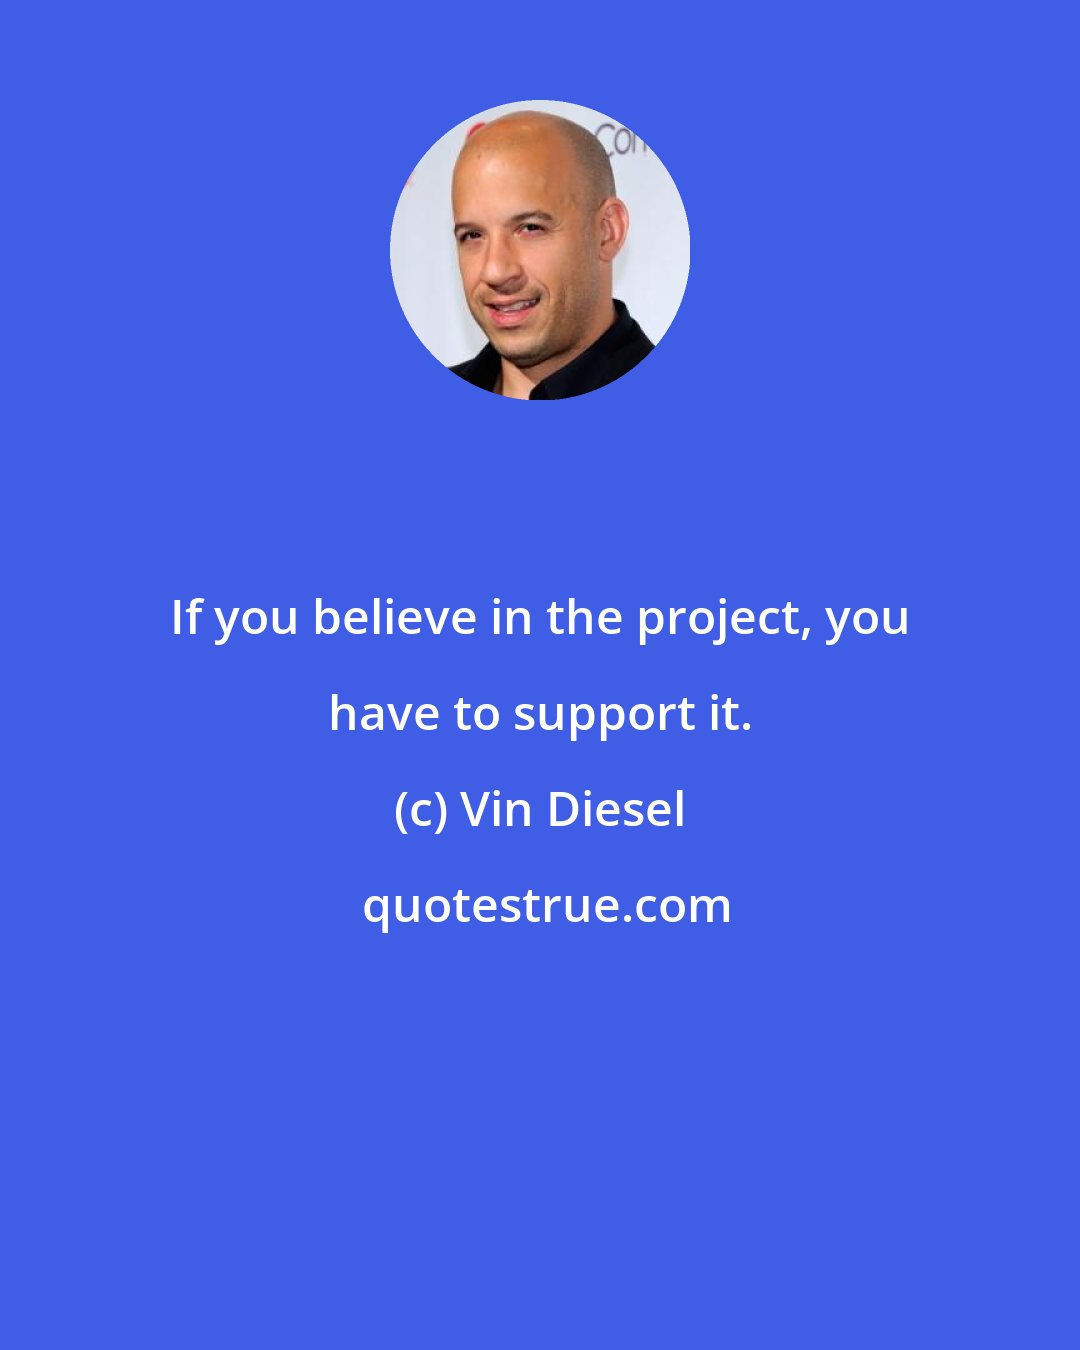 Vin Diesel: If you believe in the project, you have to support it.